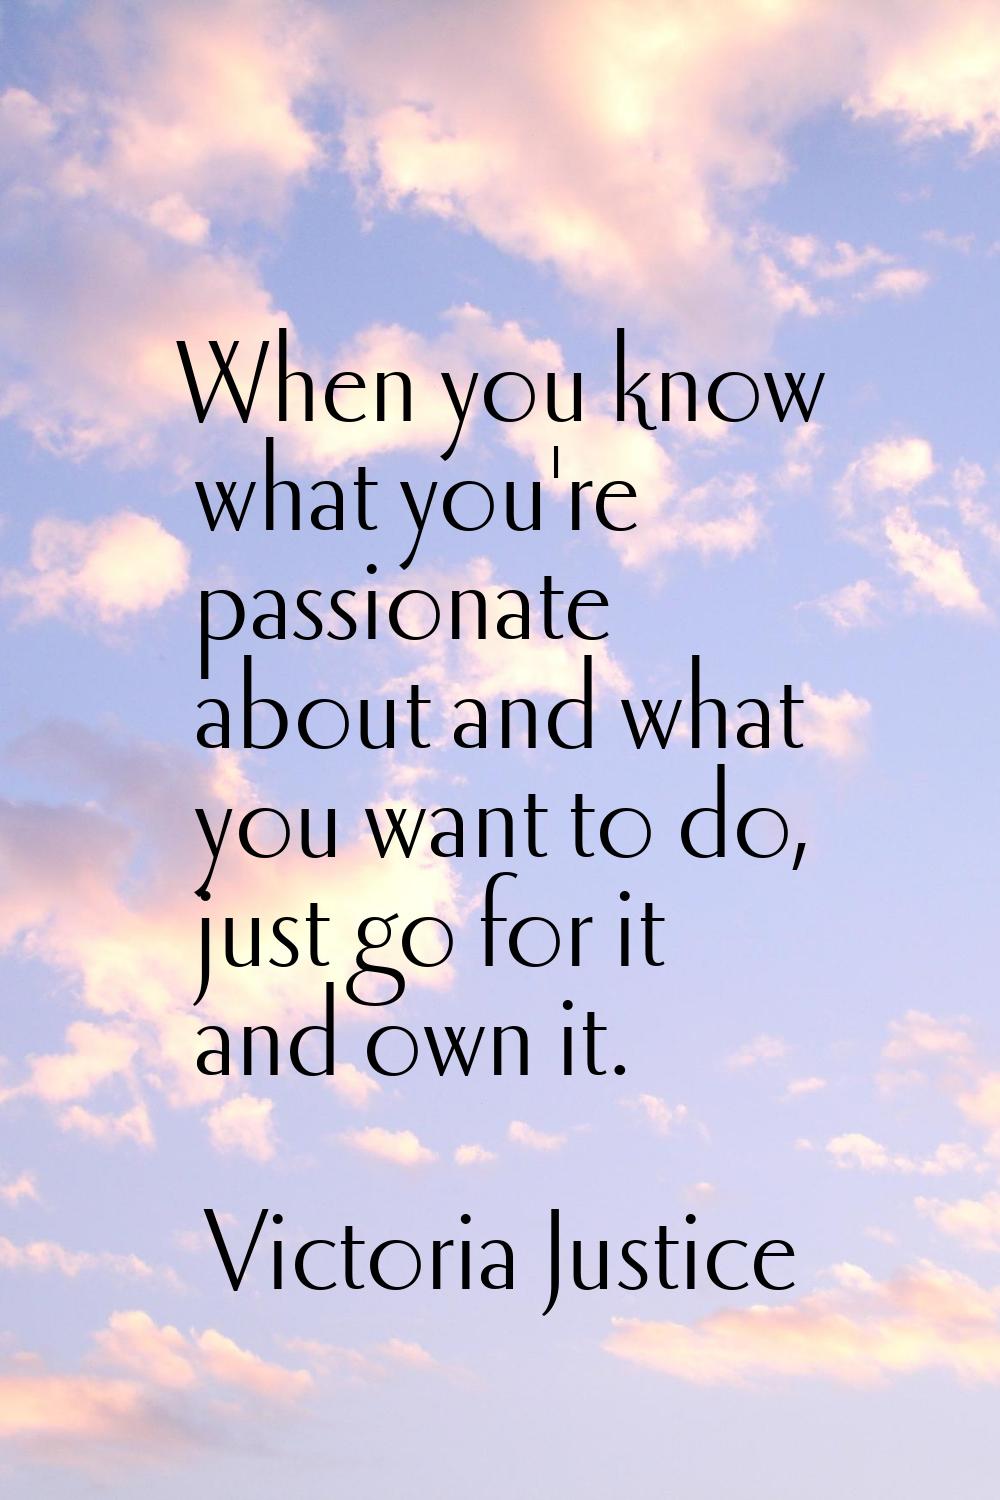 When you know what you're passionate about and what you want to do, just go for it and own it.